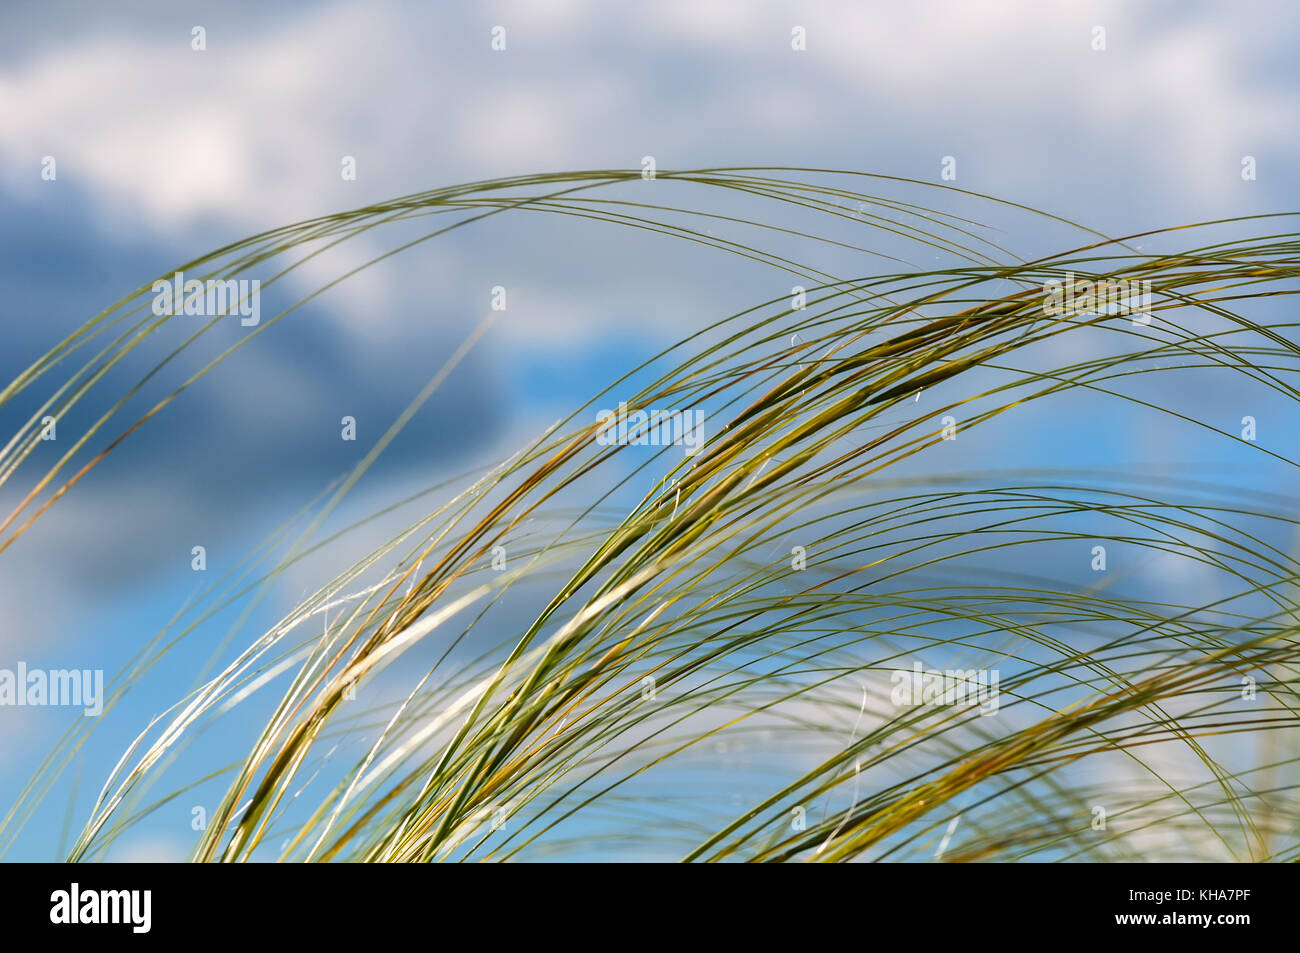 Abstract natural decorative background of feather grass on a background of blue sky and clouds Stock Photo